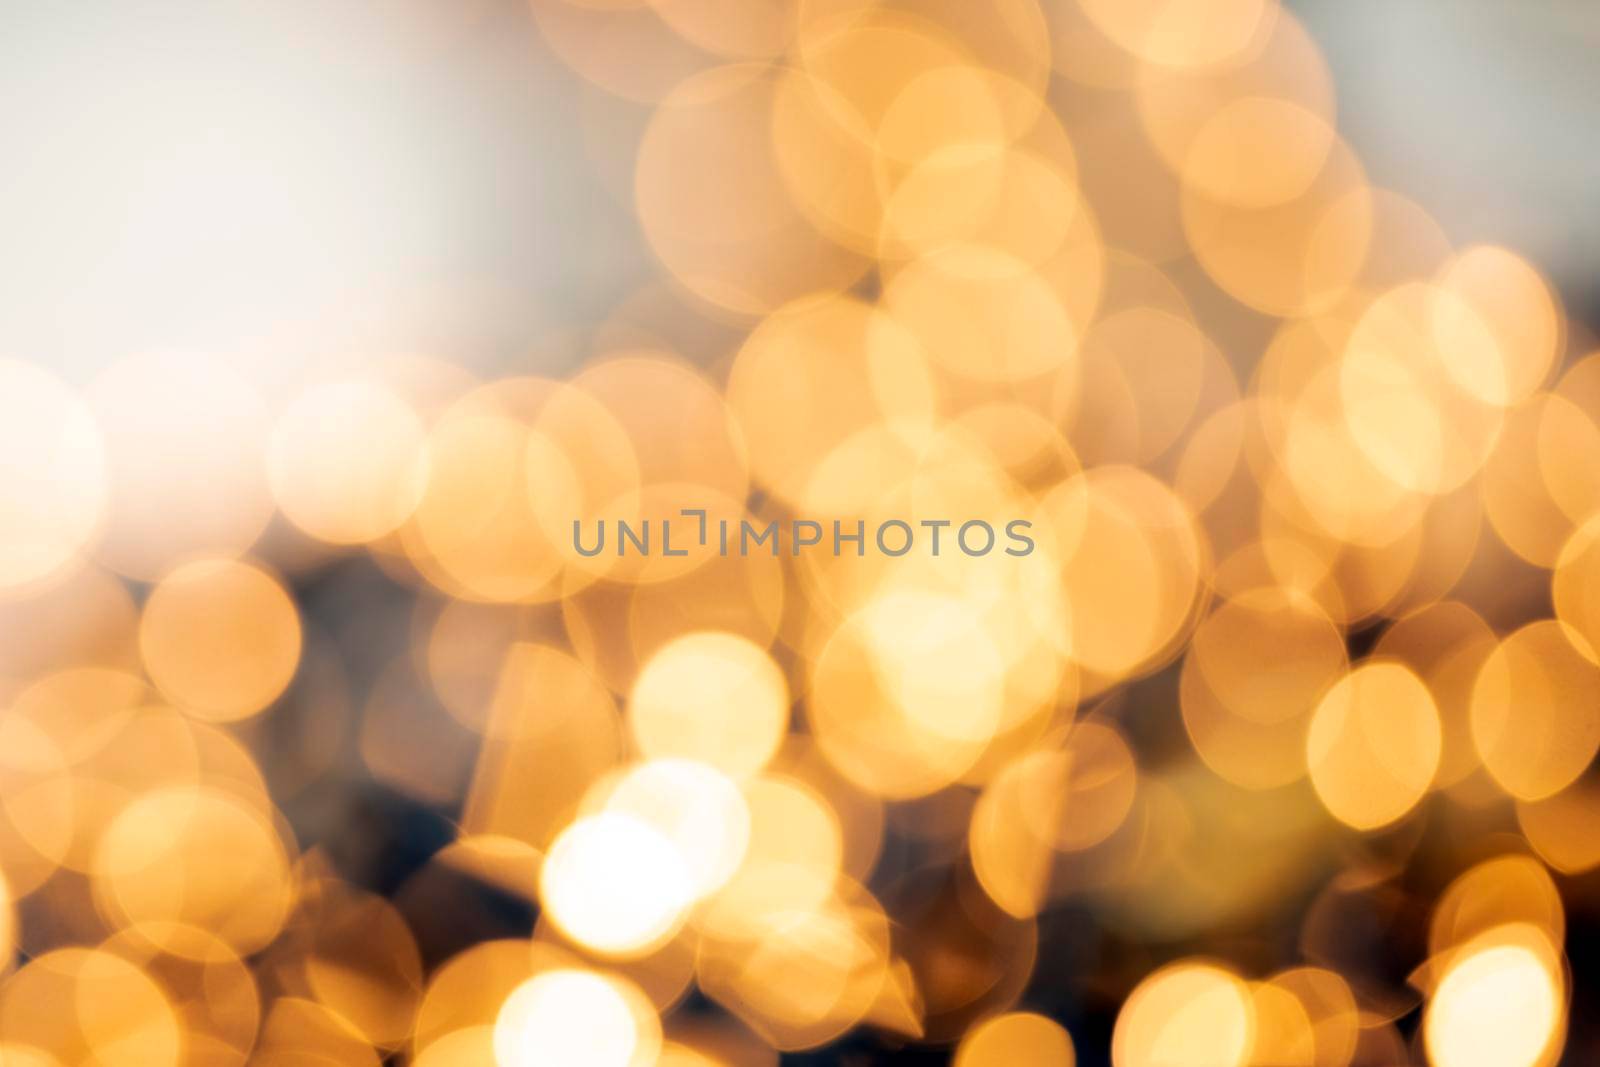 Defocused gold light abstract Christmas or Holiday background texture, sparkling yellow blurred warm tones colorful